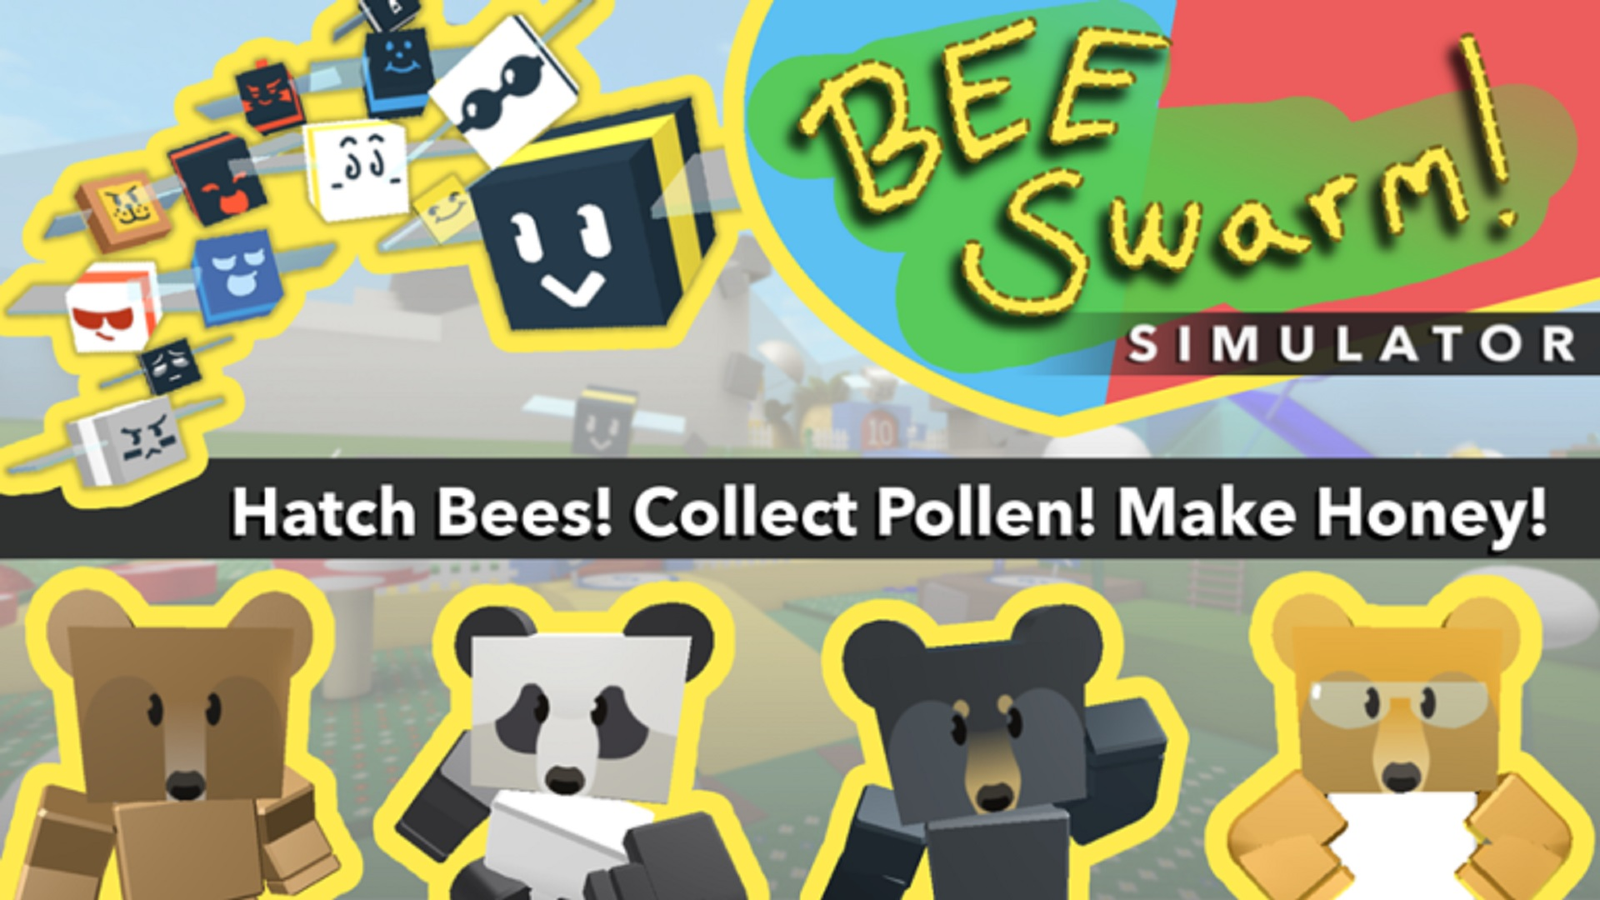 DIGITAL BEE? + HOW TO GET THE BEE SWARM RP2 RELIC + ALL 7 COG CODES!, Roblox Bee Swarm Simulator